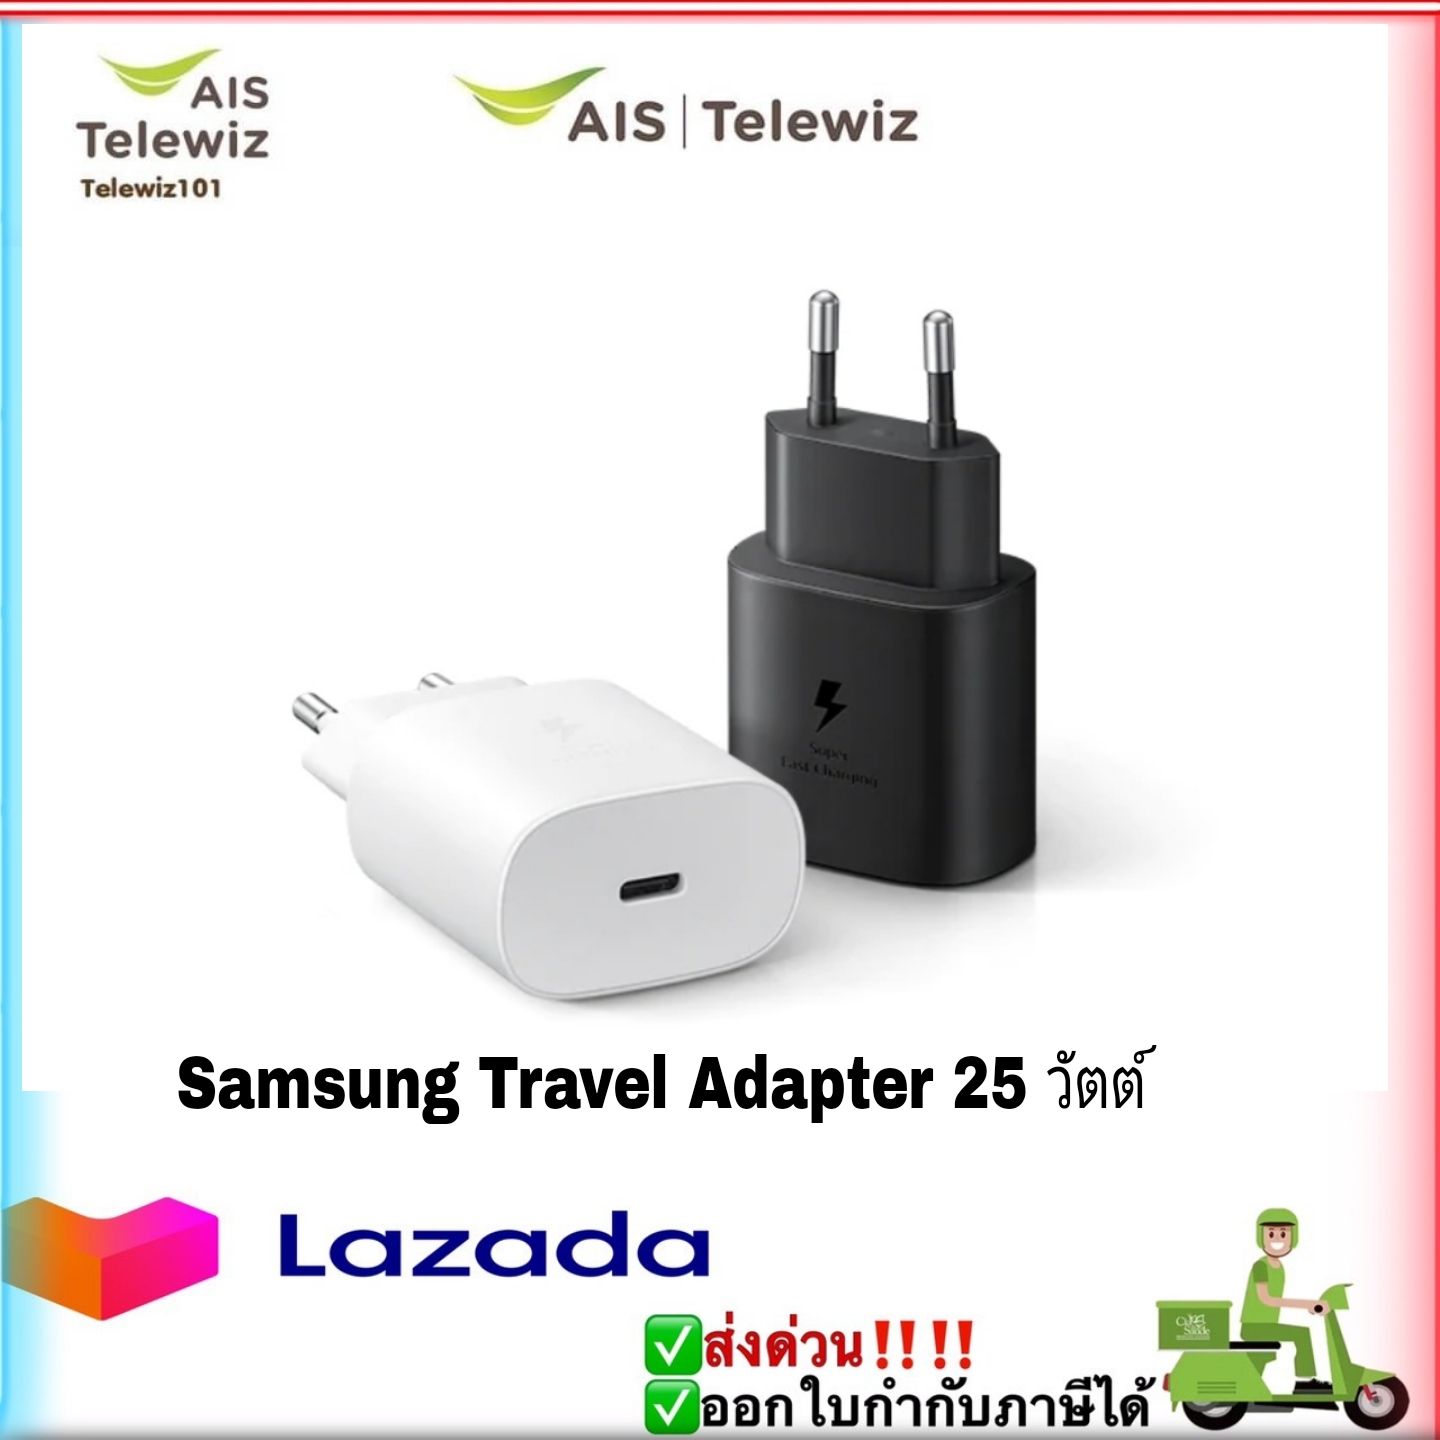 Samsung Travel Adapter (25W) หัวชาร์จซัมซุง 25w Type-C Super Fast Charge 25 W